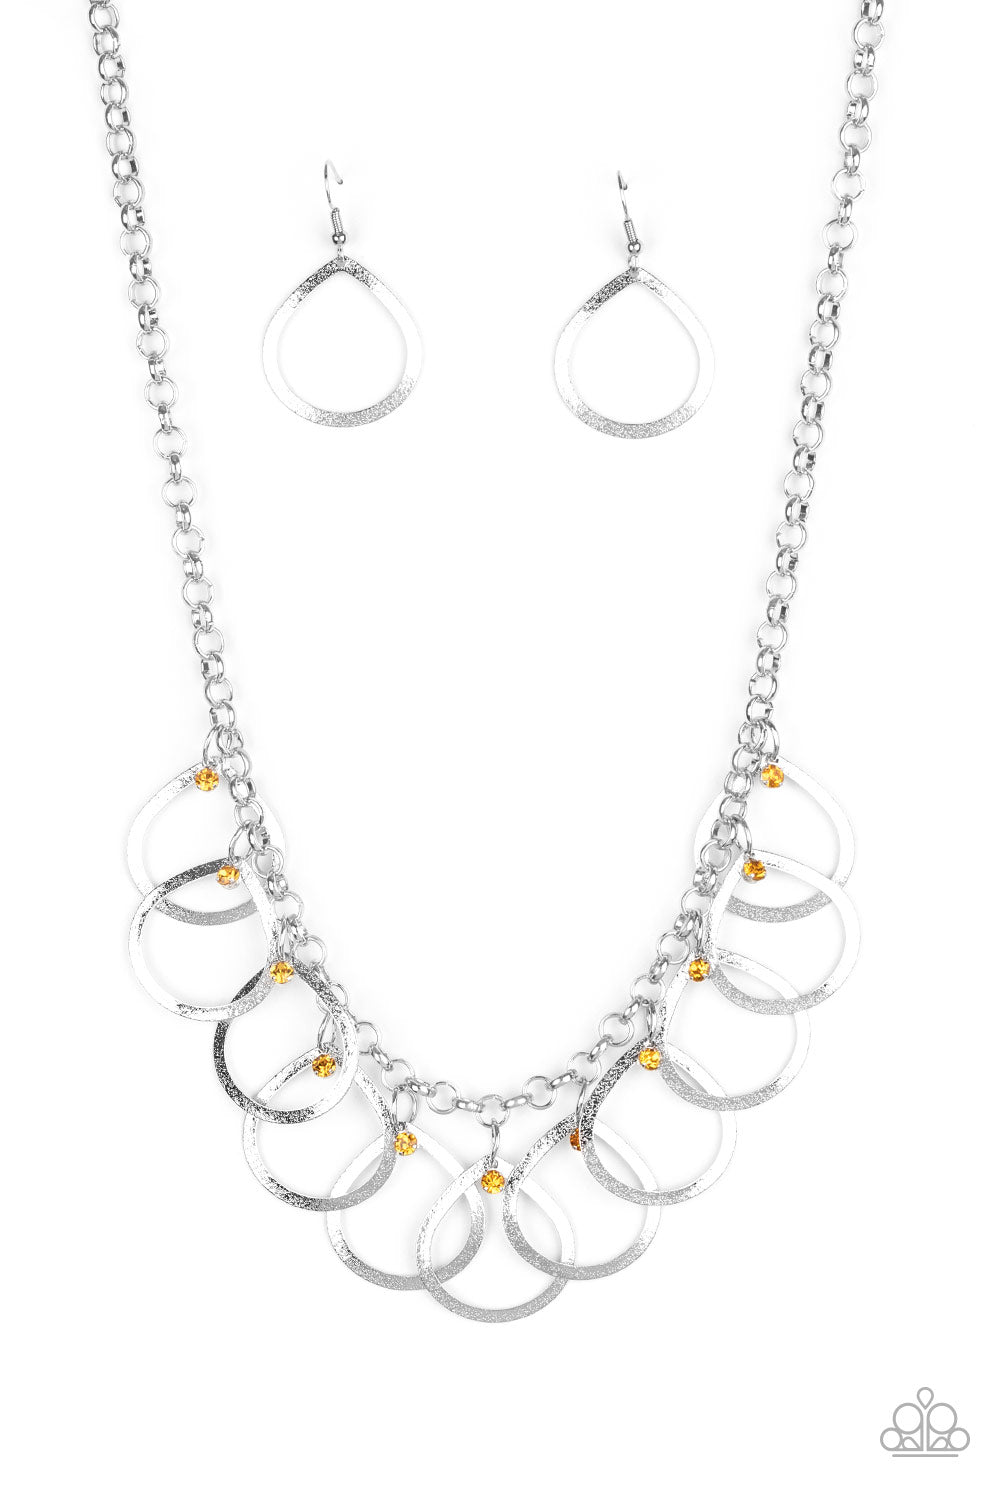 Drop by Drop - Yellow necklace 857